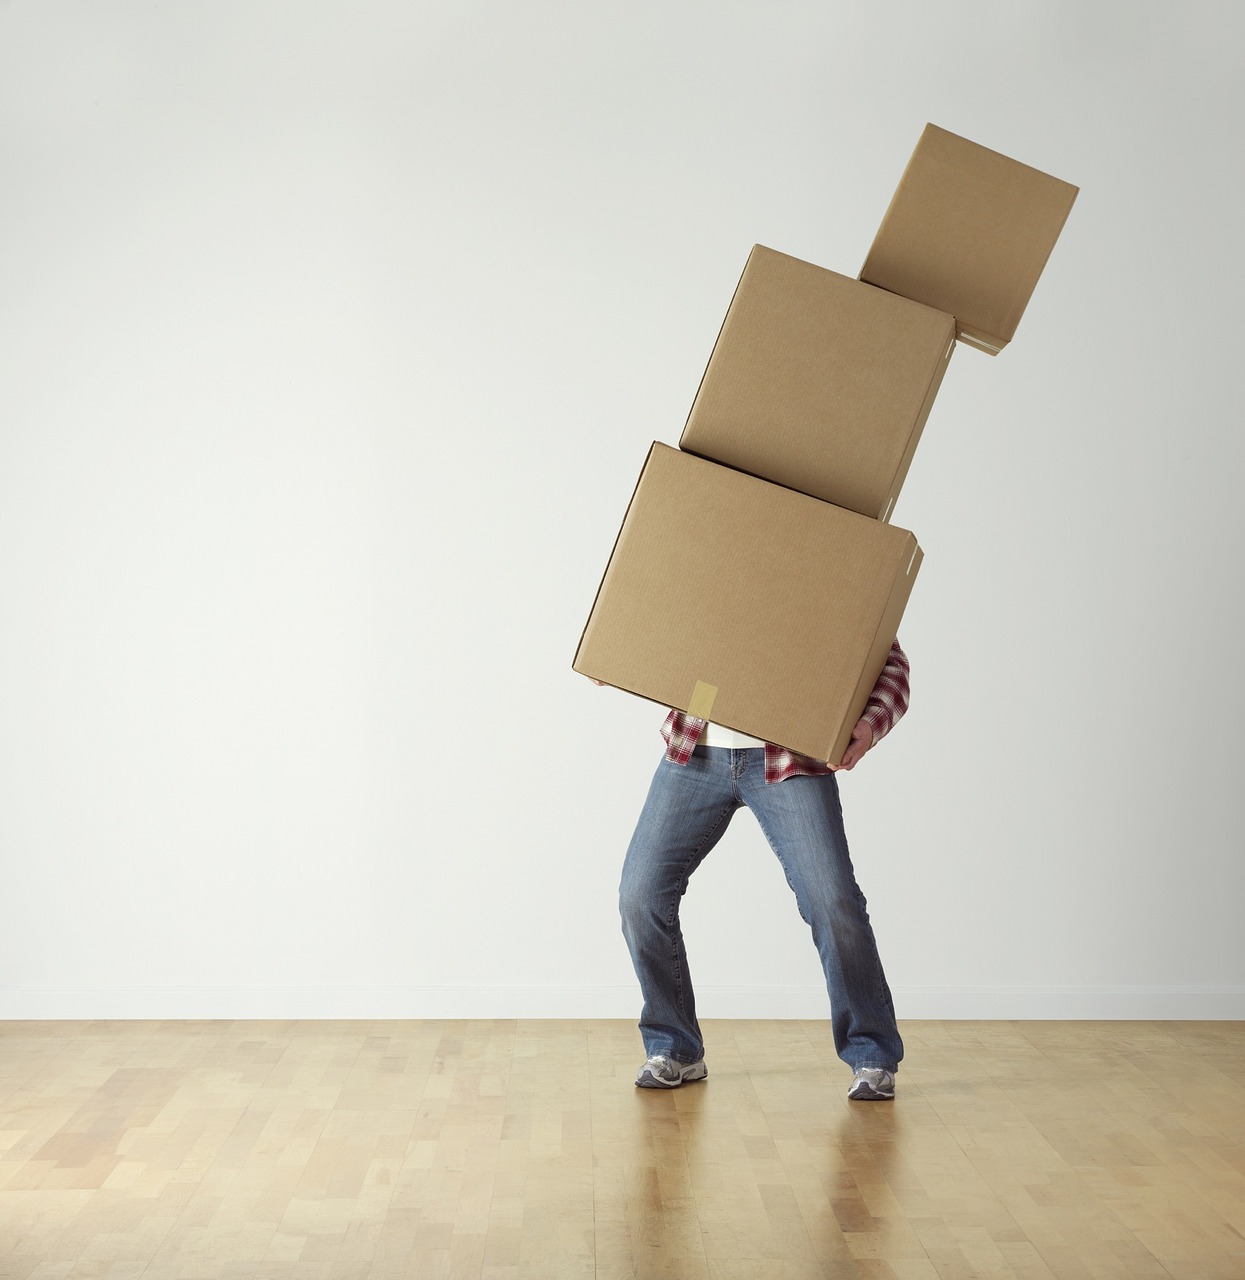 Download free photo of Boxes,cardboard,carrying,overload,move - from  needpix.com